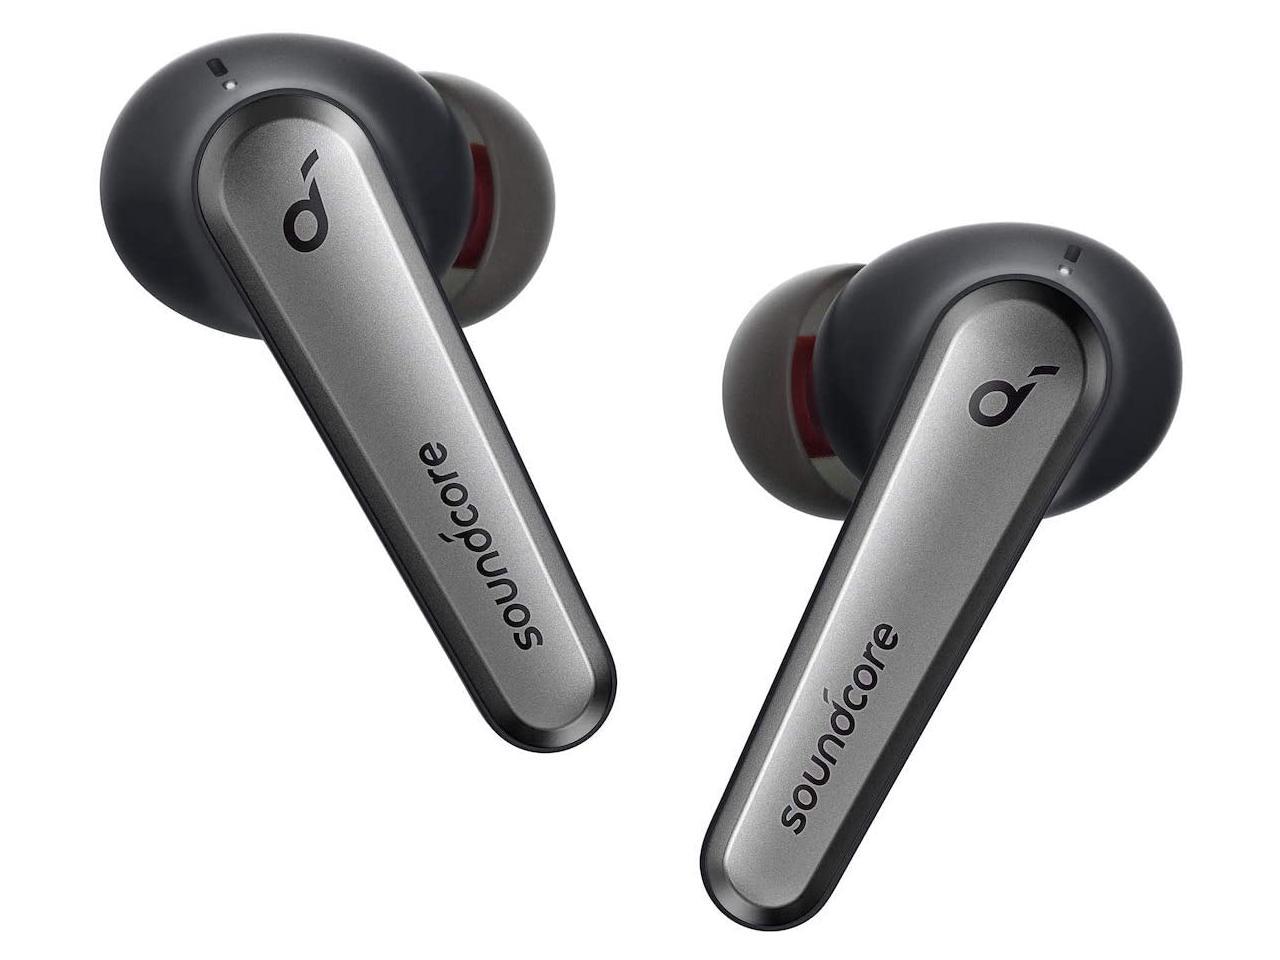 Anker Soundcore Liberty Air 2 Pro True ANC Wireless Earbuds *RFB* $50